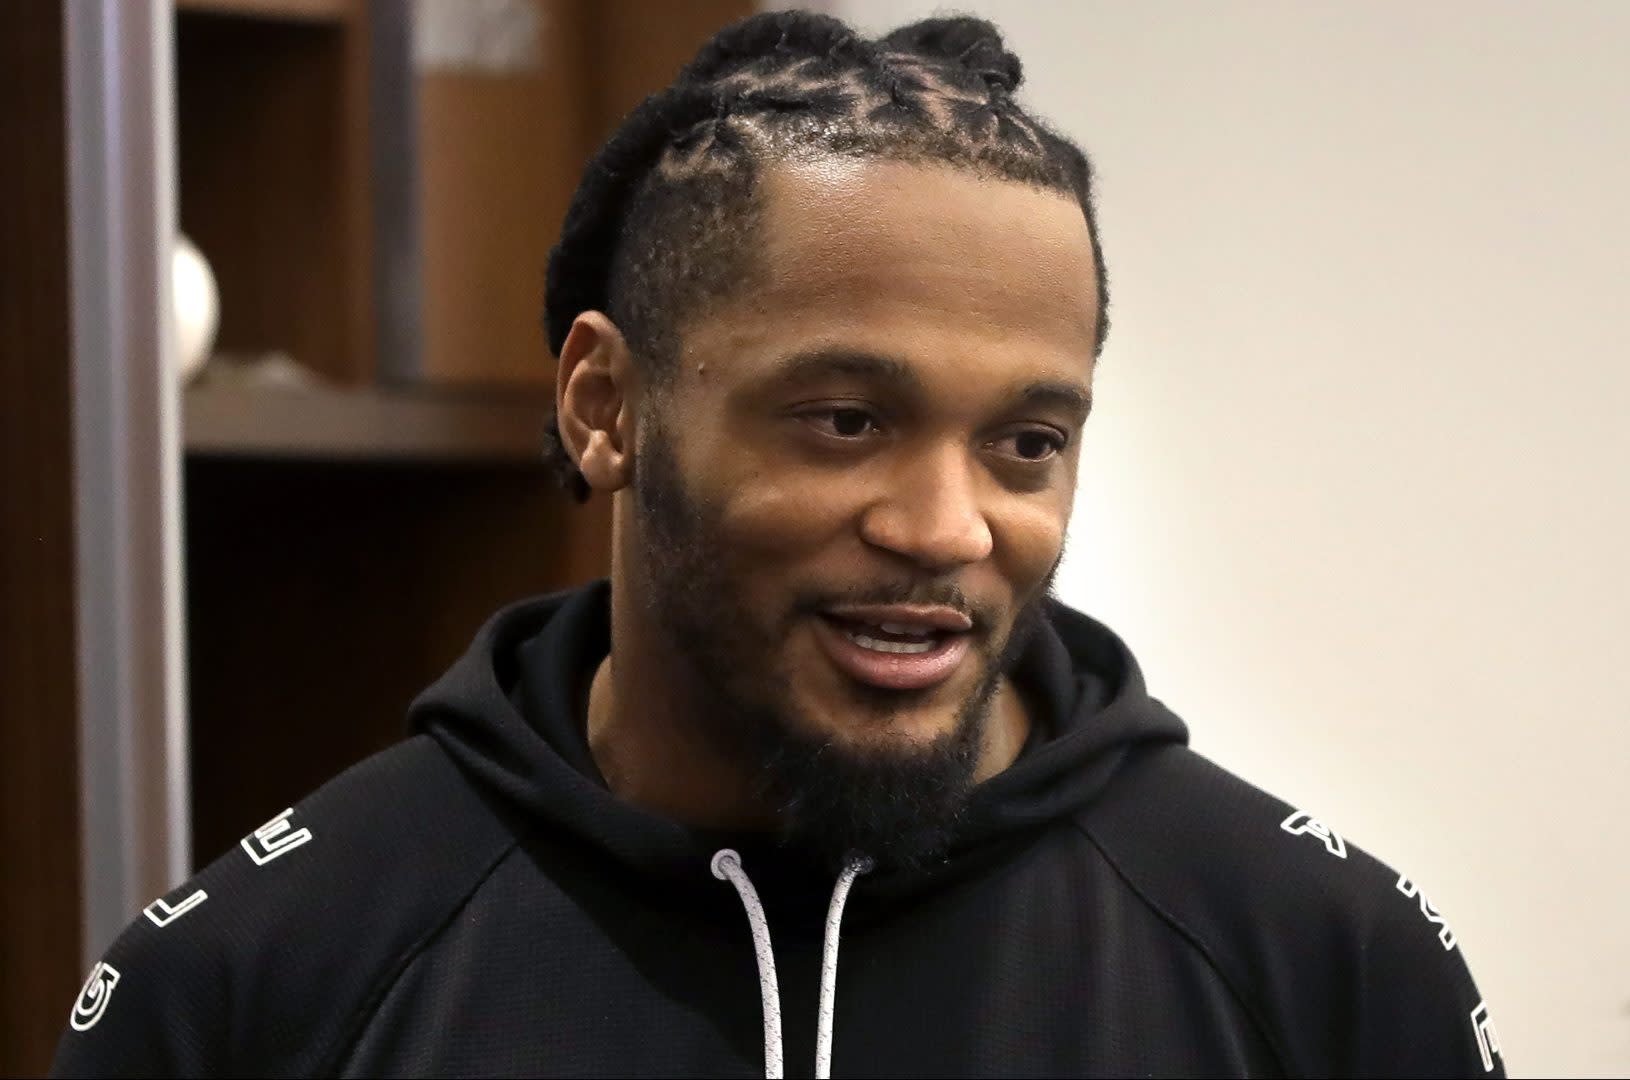 Patrick Chung declines comment on indictment